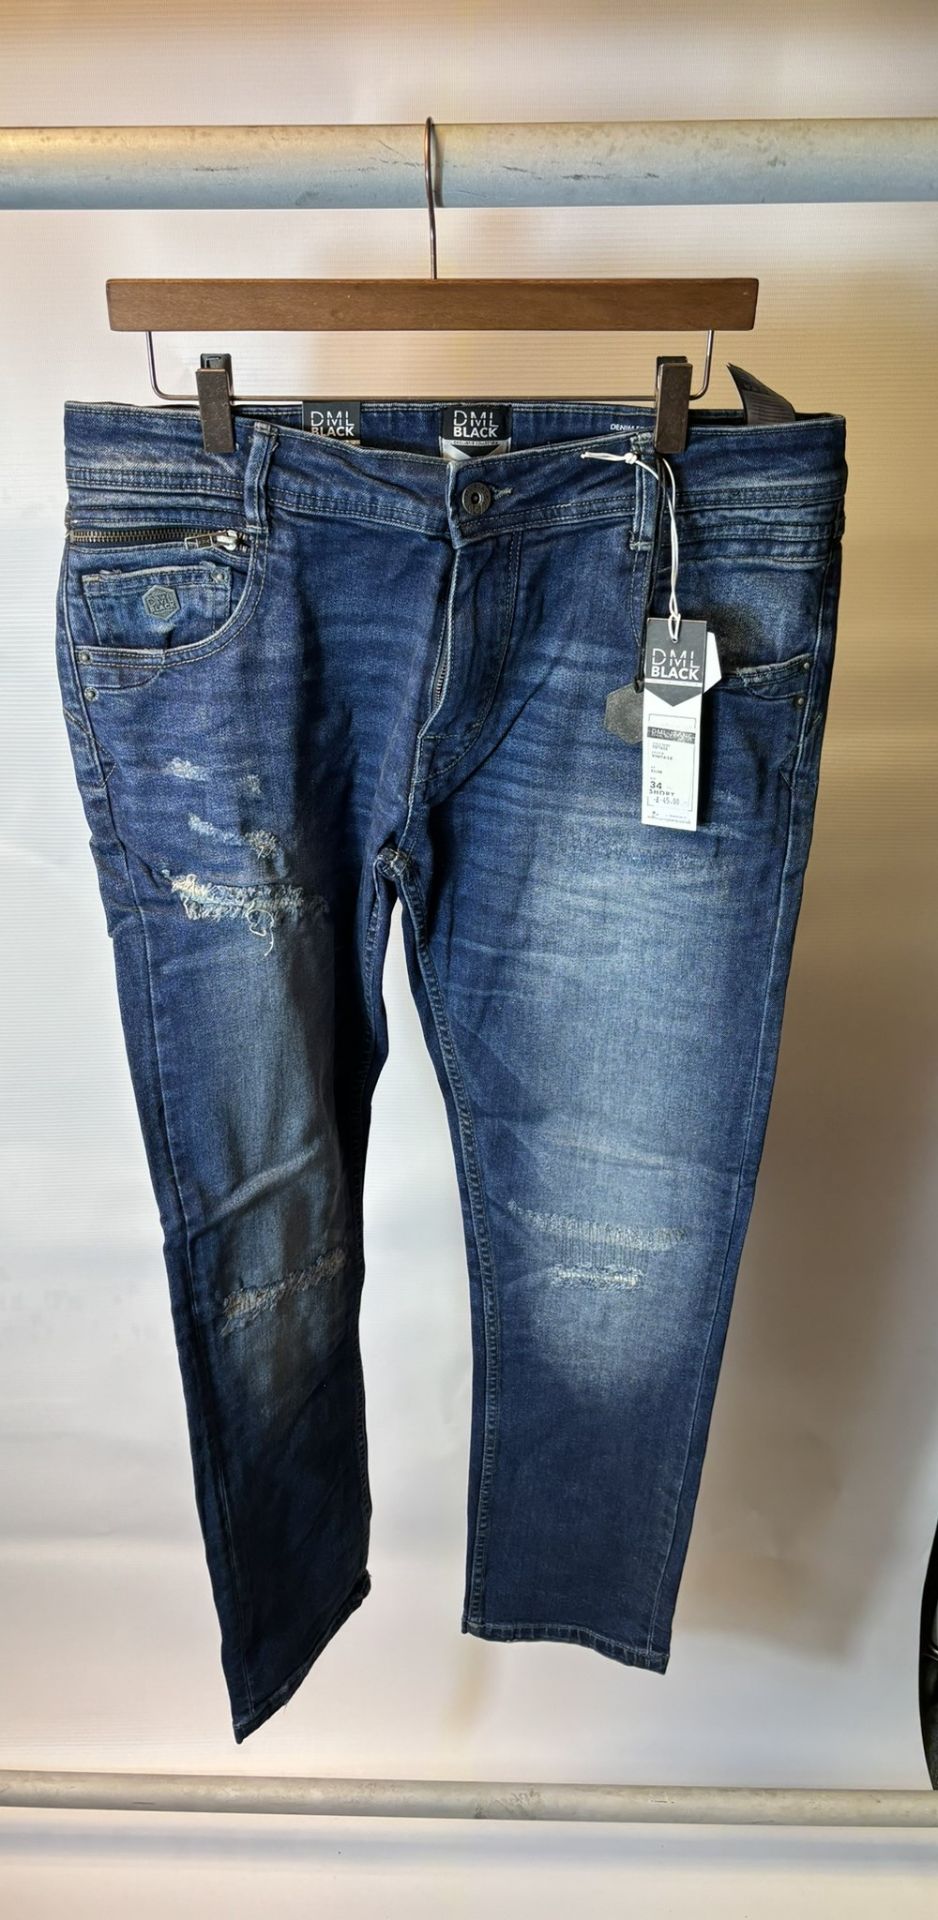 13 x Pairs Of various Sized DML Jeans Prophecy & Voyage Blue Jeans - Image 13 of 39